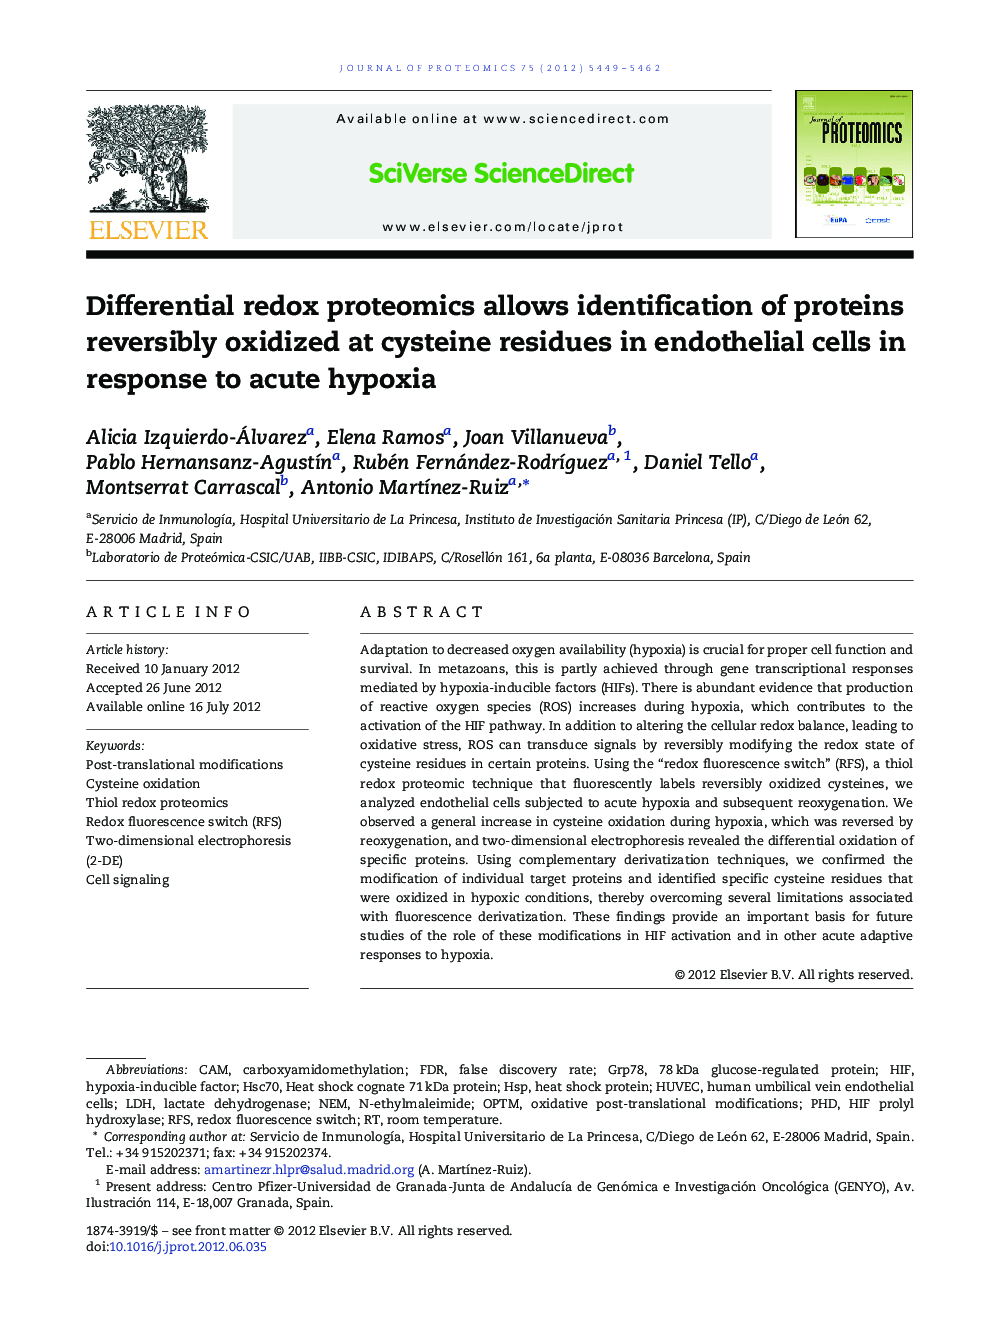 Differential redox proteomics allows identification of proteins reversibly oxidized at cysteine residues in endothelial cells in response to acute hypoxia